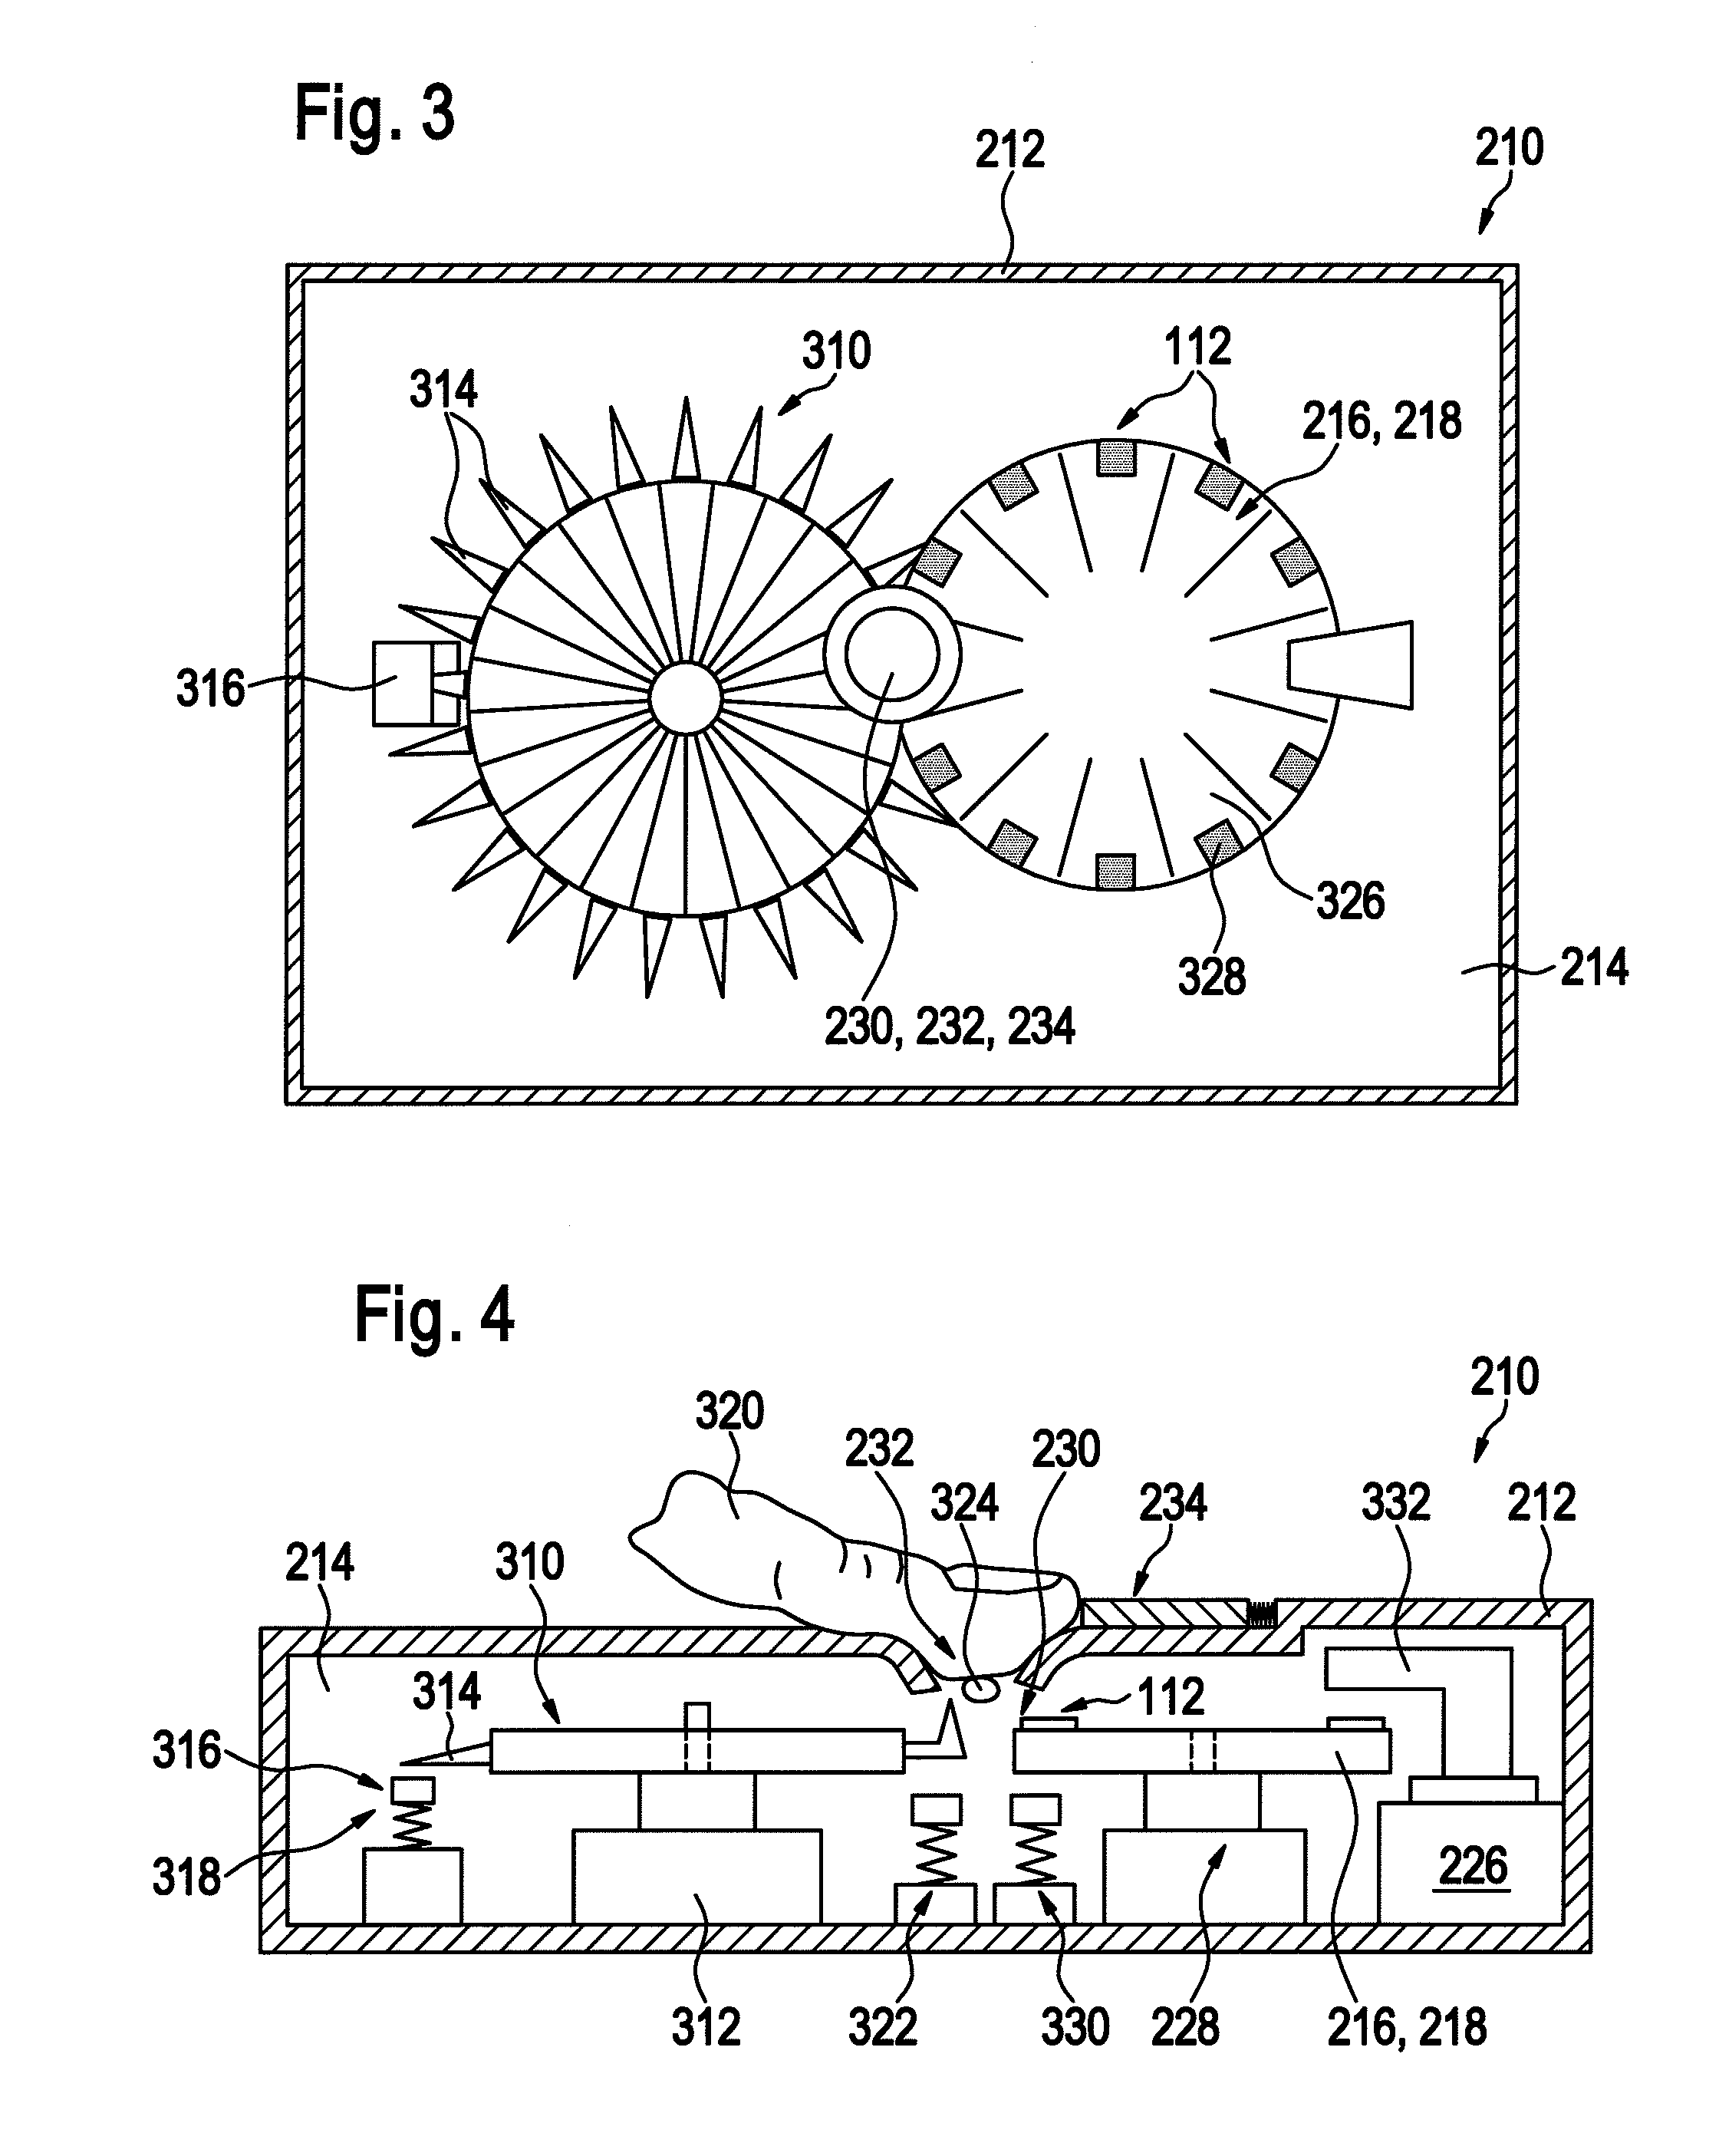 Portable measuring system having an optimized assembly space